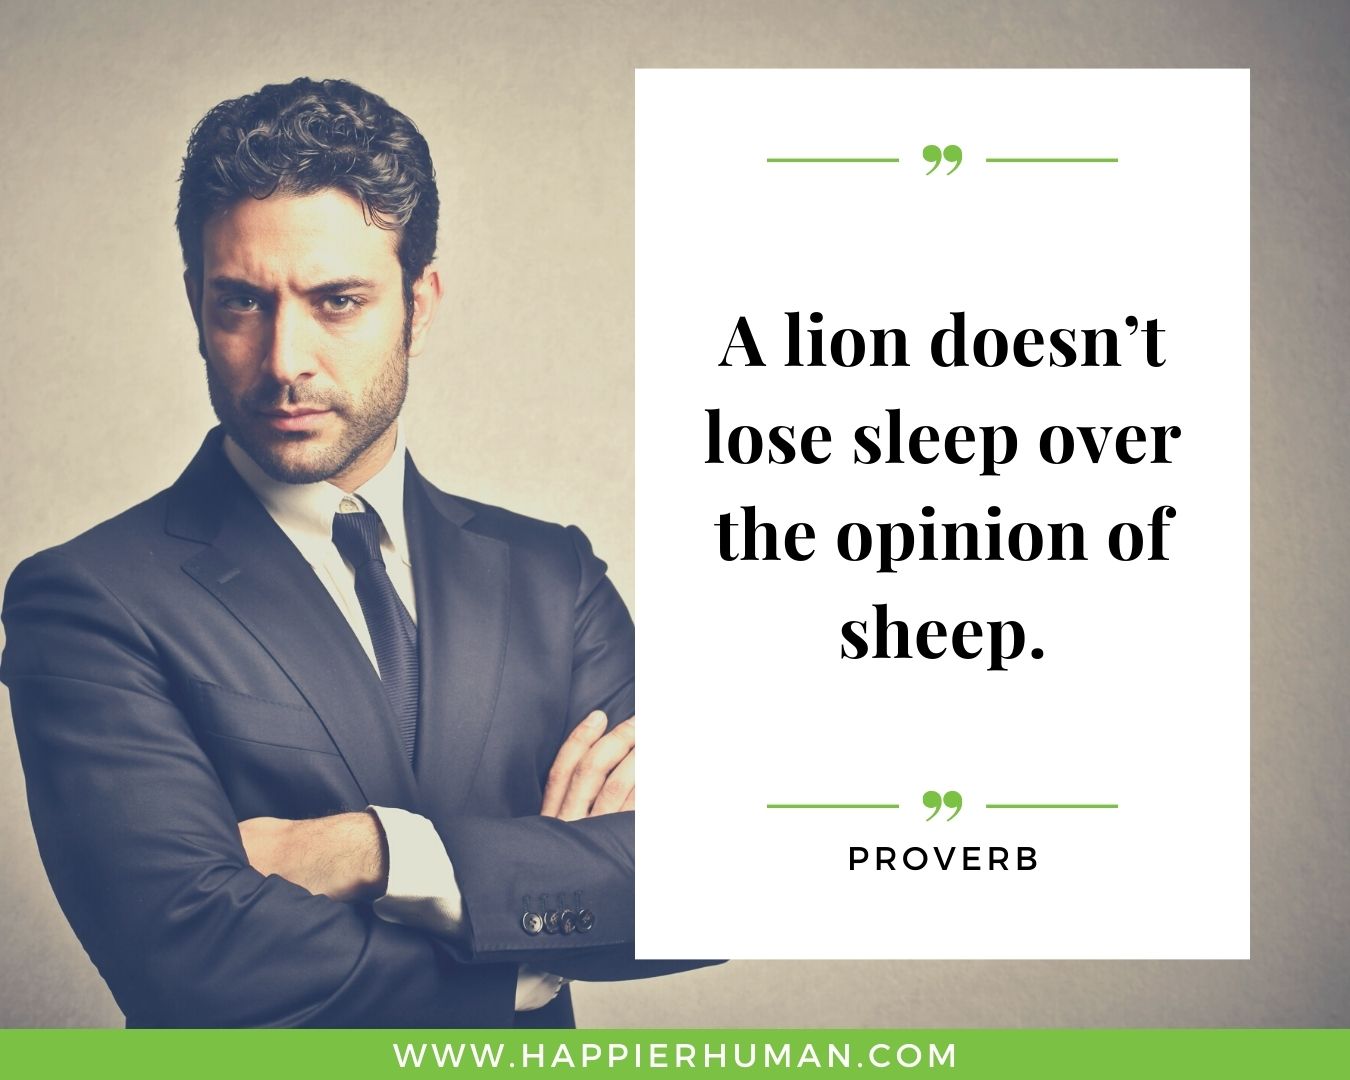 Haters Quotes - “A lion doesn’t lose sleep over the opinion of sheep.” - Proverb